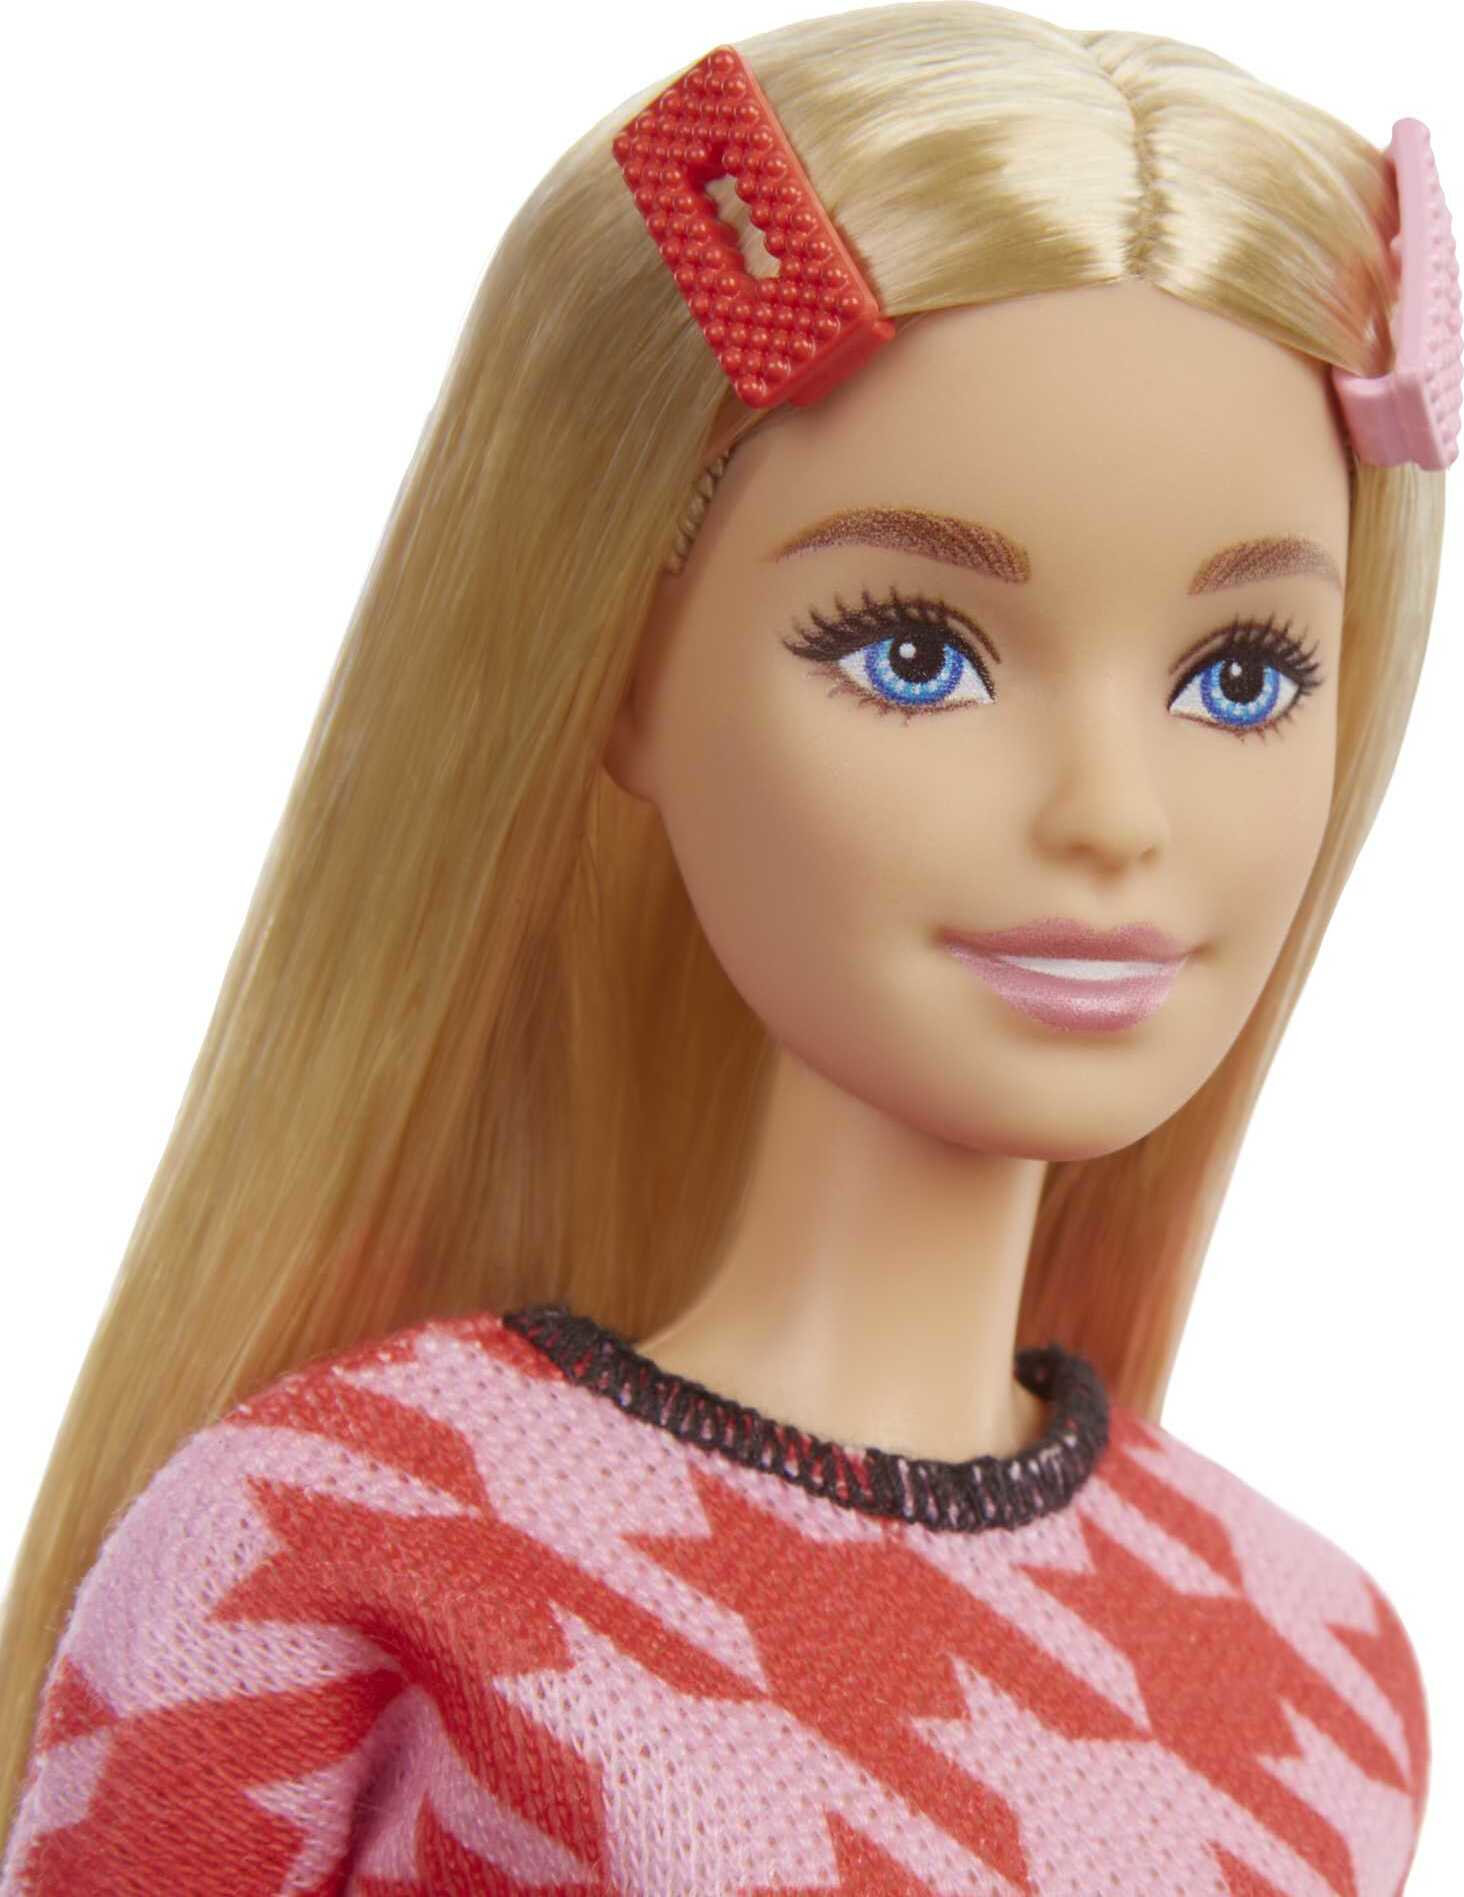 Barbie Fashionistas Doll #169 with Long Blonde Hair in Houndstooth Crop Top & Skirt - image 4 of 7